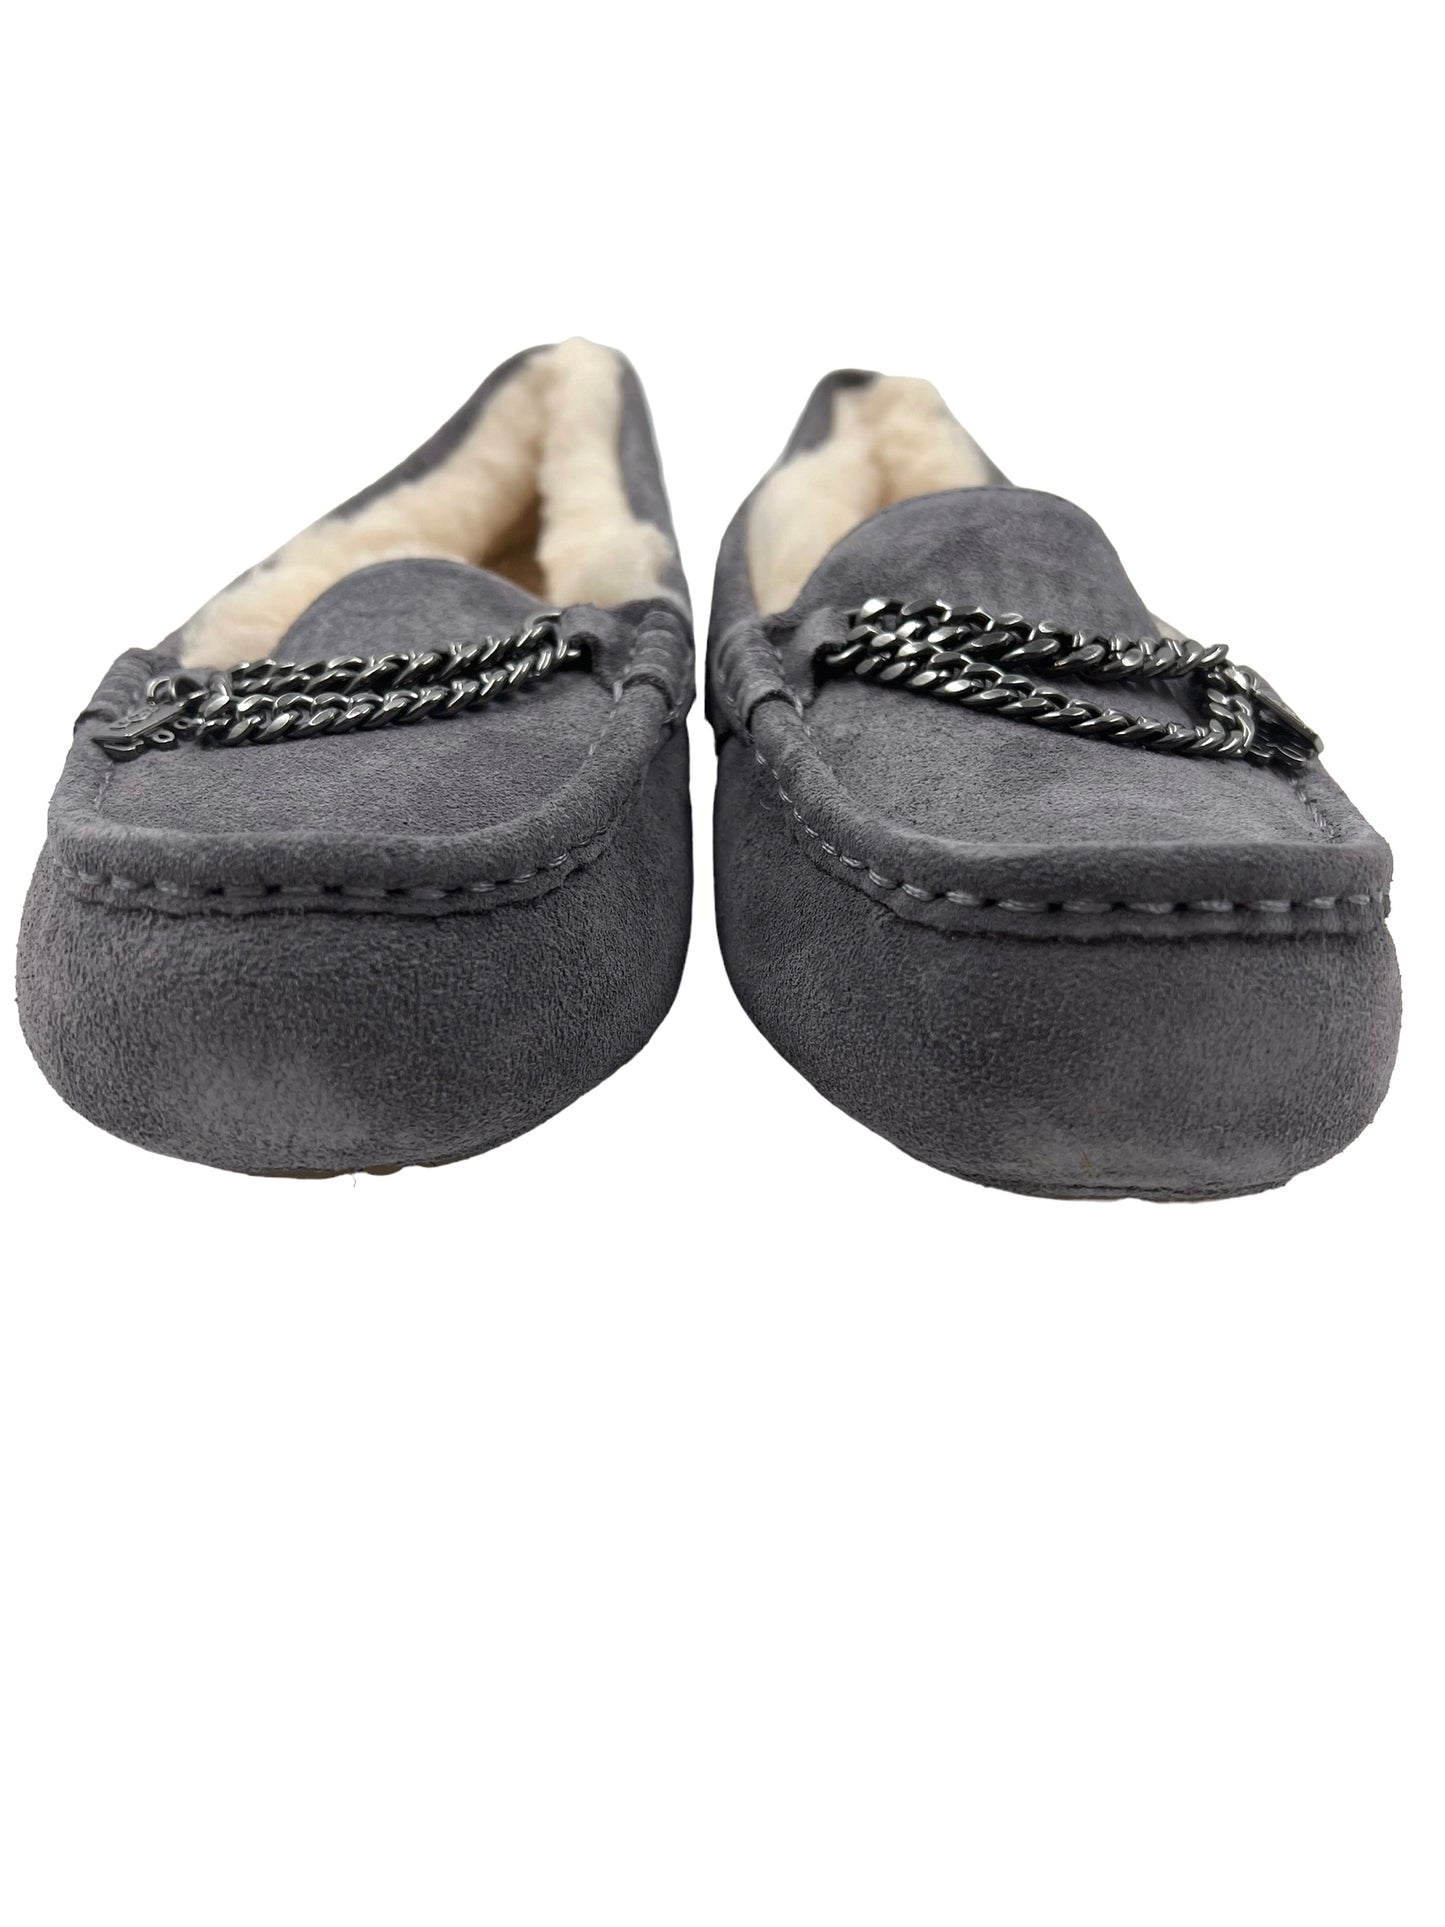 Ugg Gray Suede Size 9 Ansley Chain Moccasin Slippers